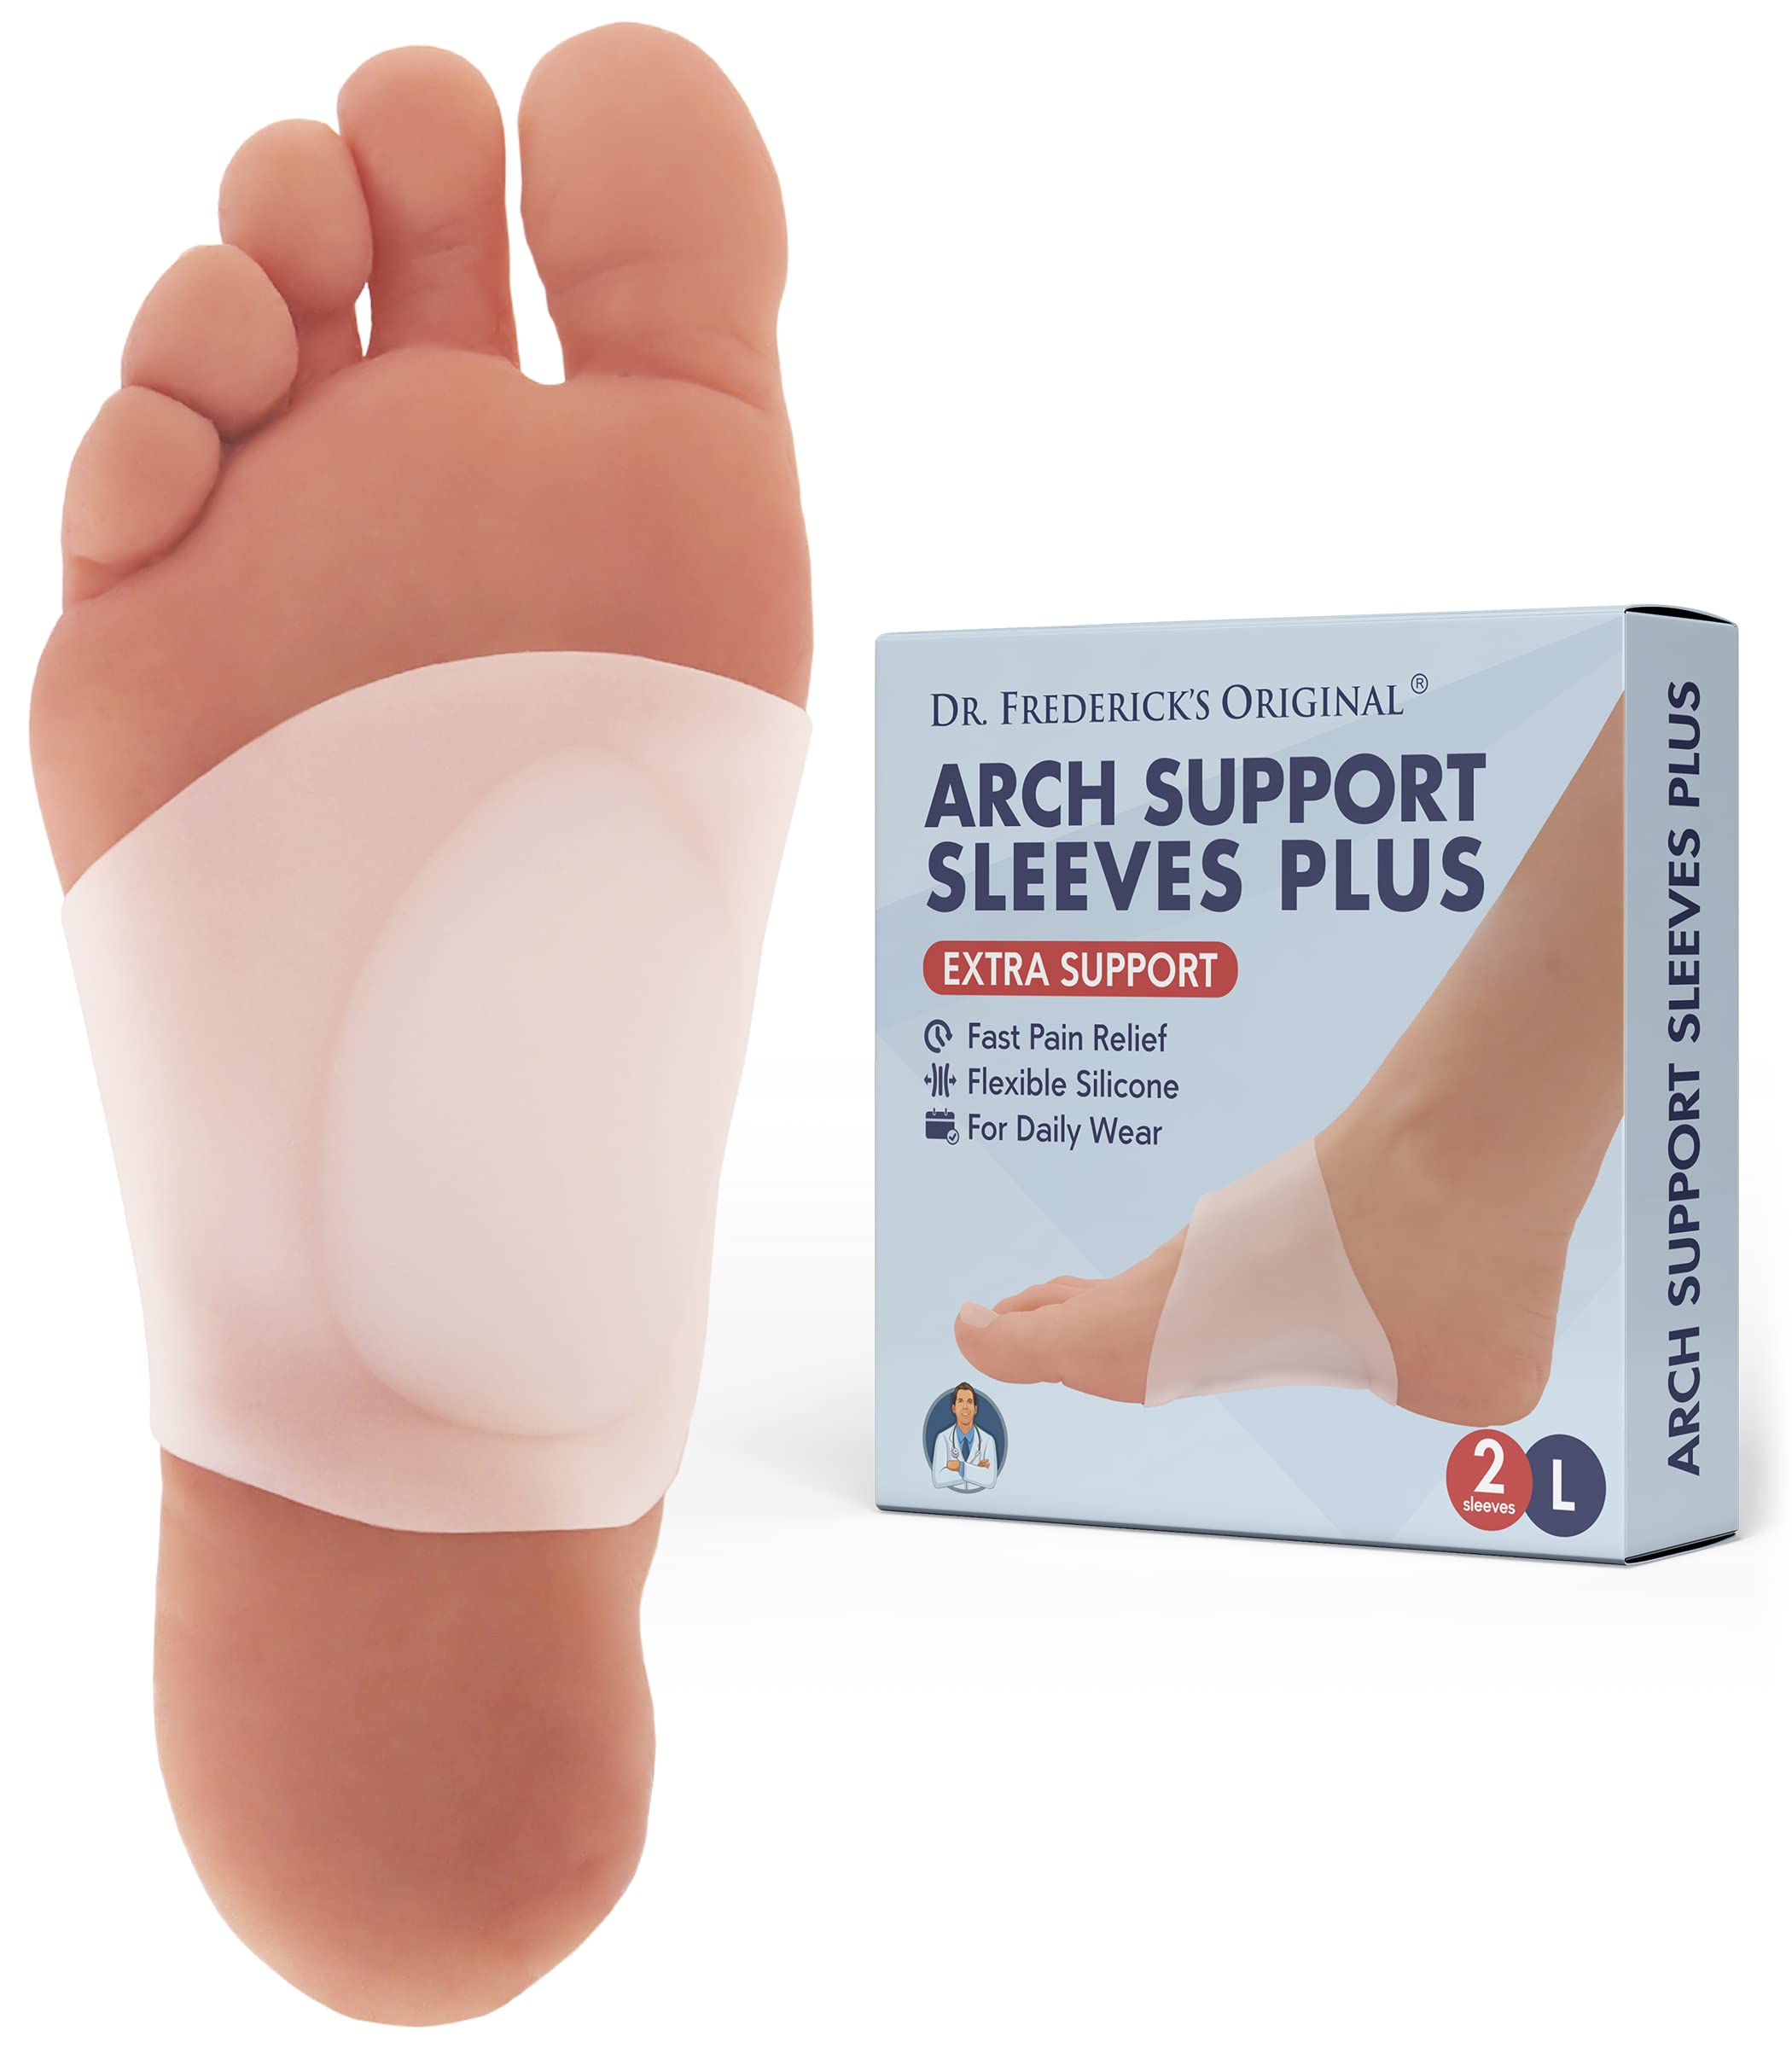 Dr. Frederick's Orig Dr Fredericks Original Arch Support Sleeves Plus - Doctor Developed Flat Foot Arch Supports for Men & Women - 2 Pieces - Arch Pa